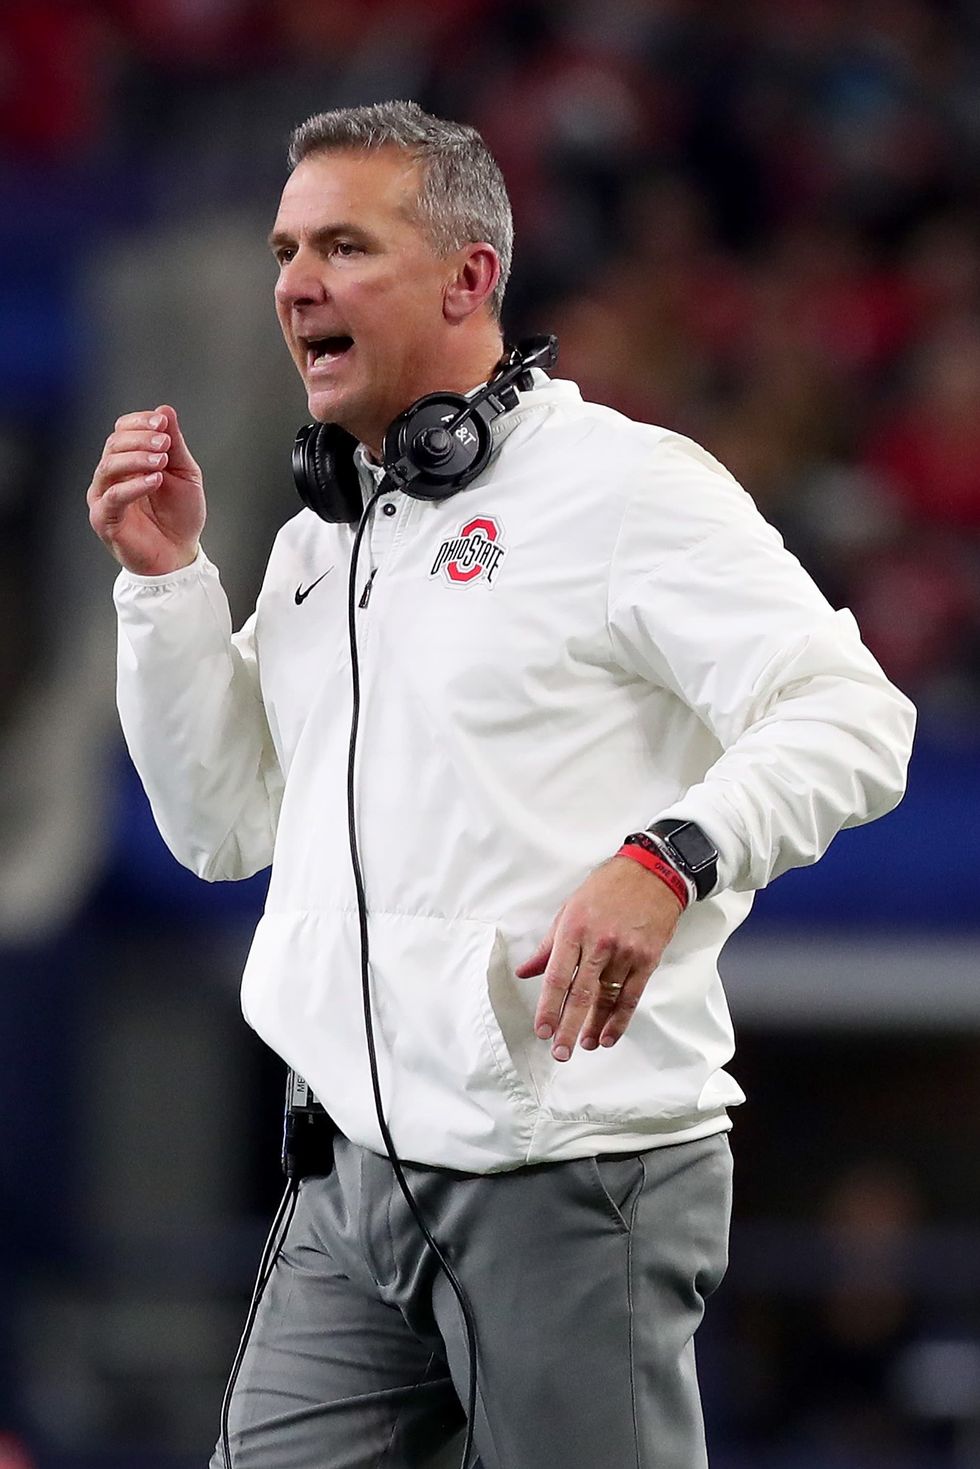 The college football report: A cocktail party and trouble at Ohio State